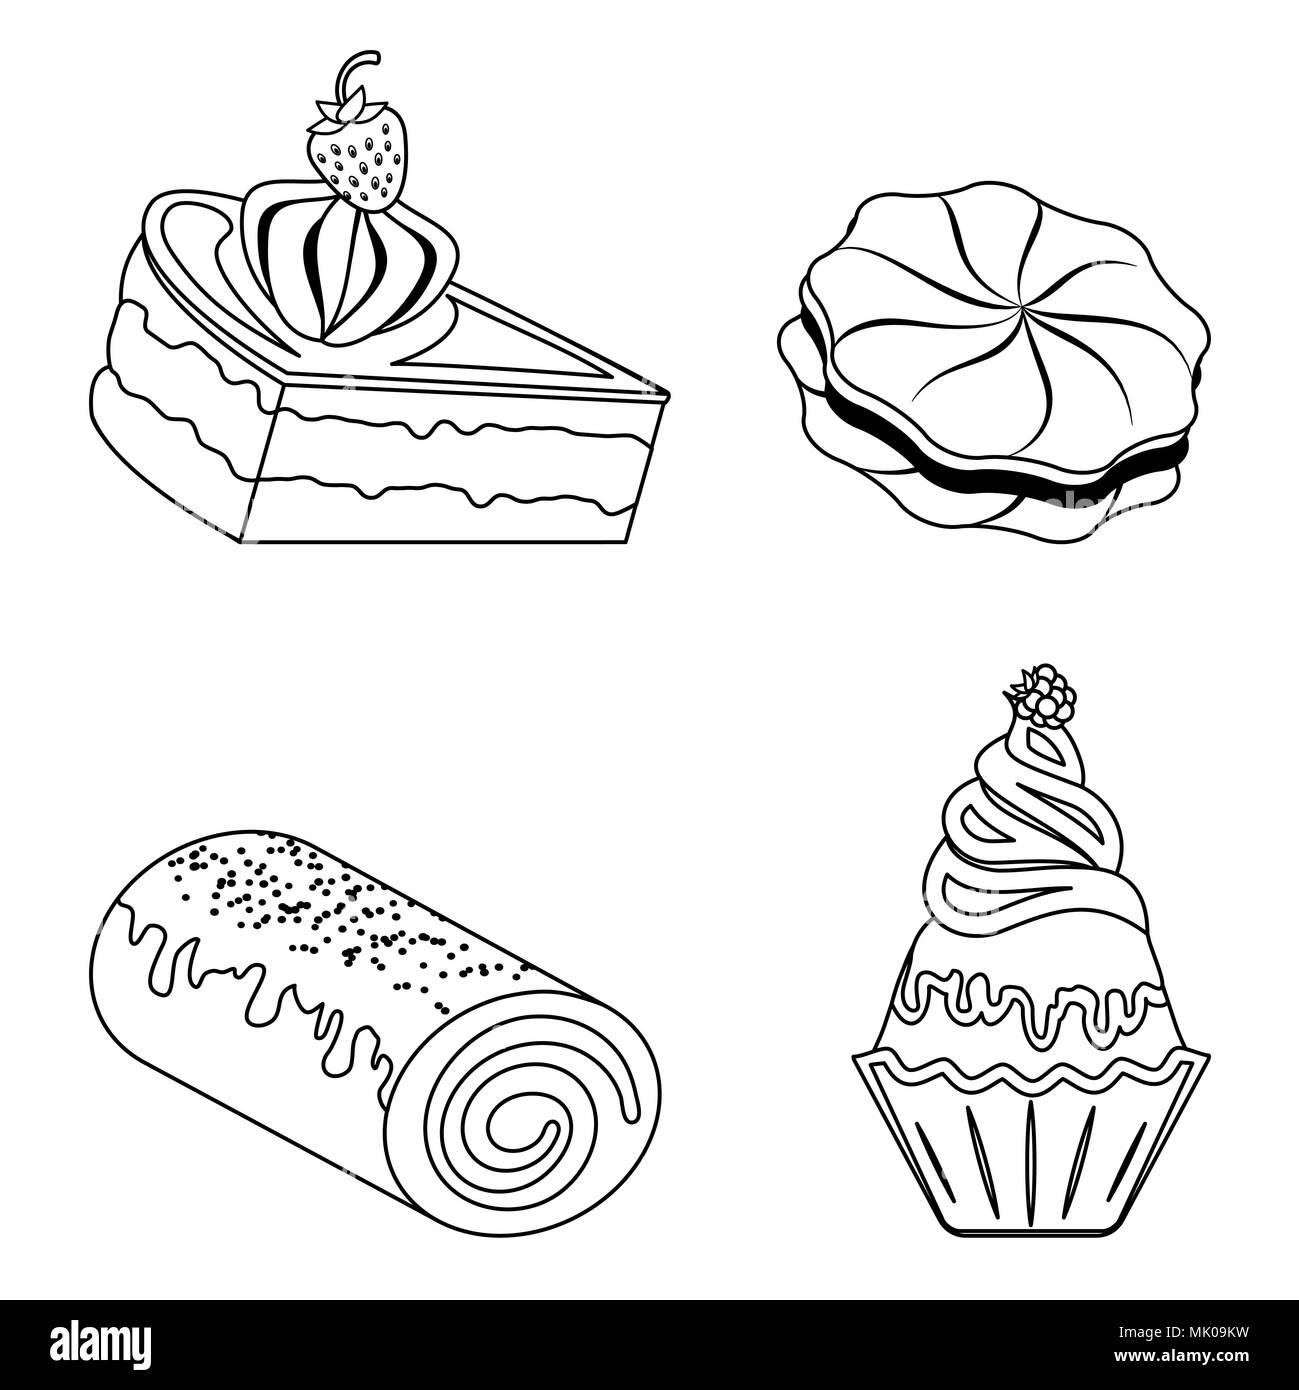 Confection, bakery products. Piece of cream cake, cupcake, sweet roll, cookies. Outline badge Stock Photo